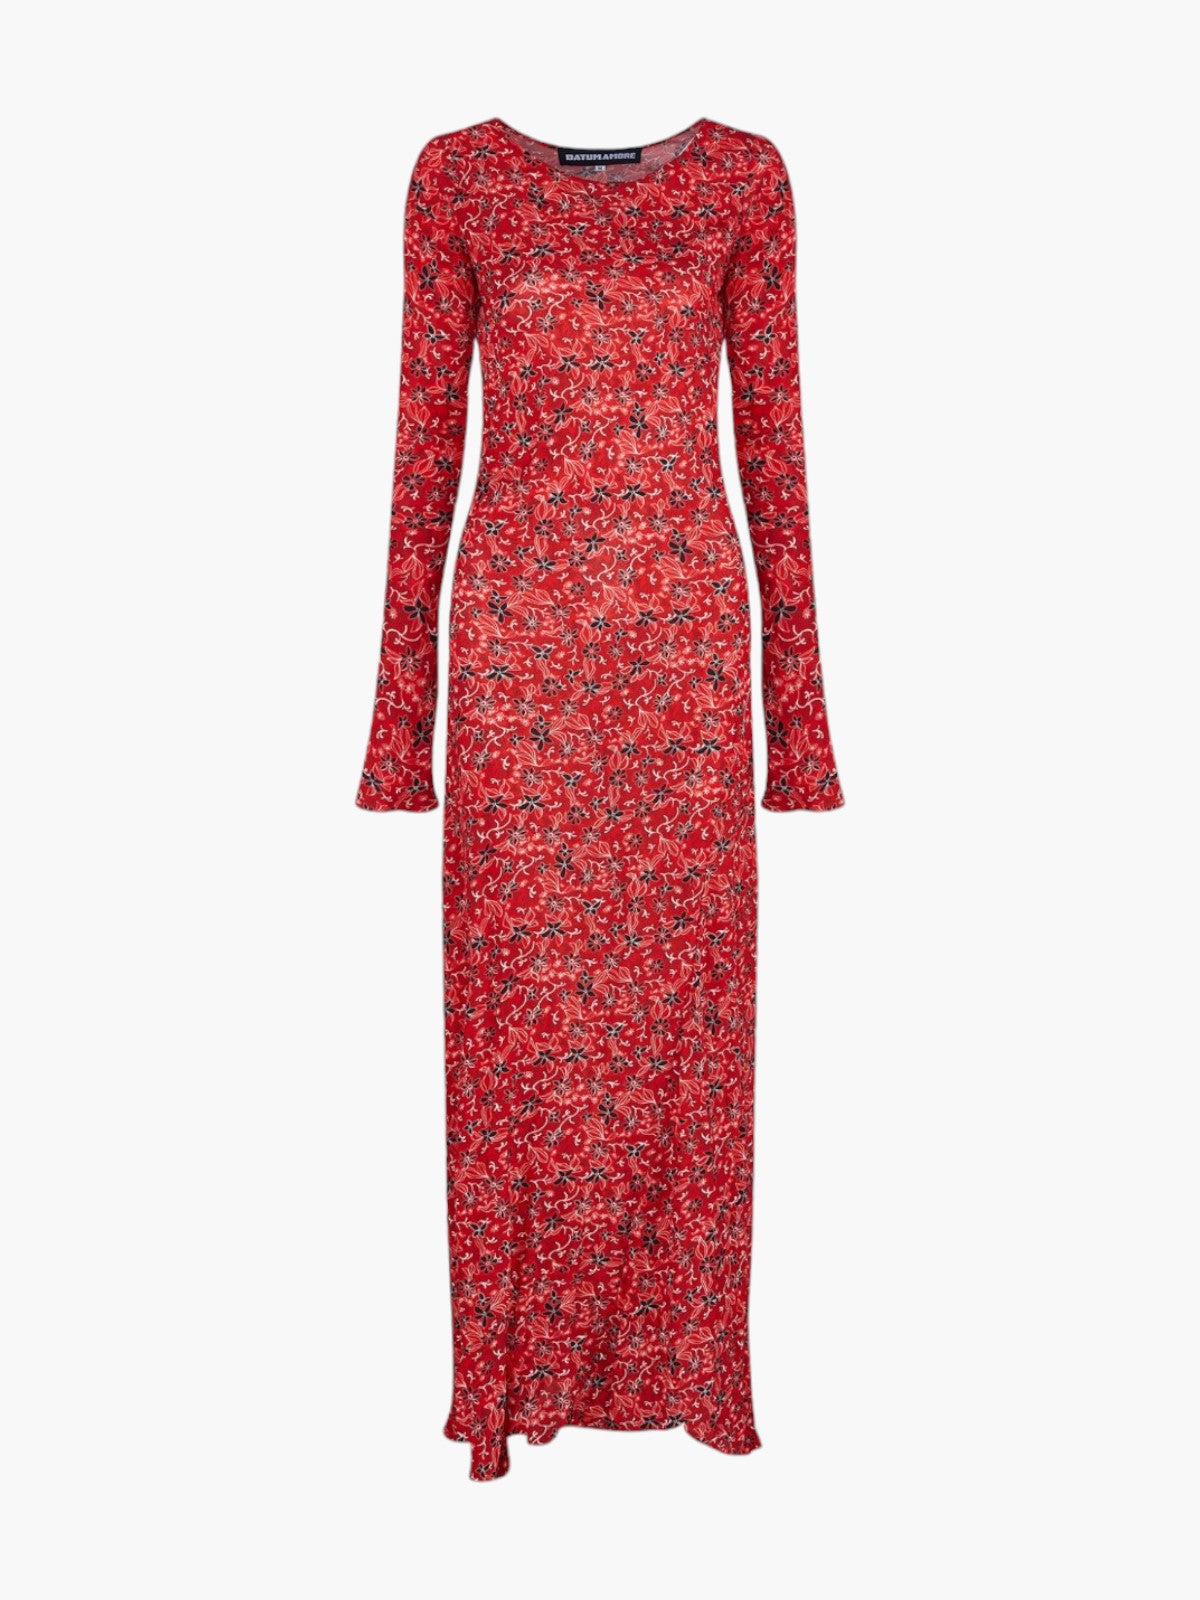 EXCLUSIVE Maria Long Dress | Red Floral EXCLUSIVE Maria Long Dress | Red Floral